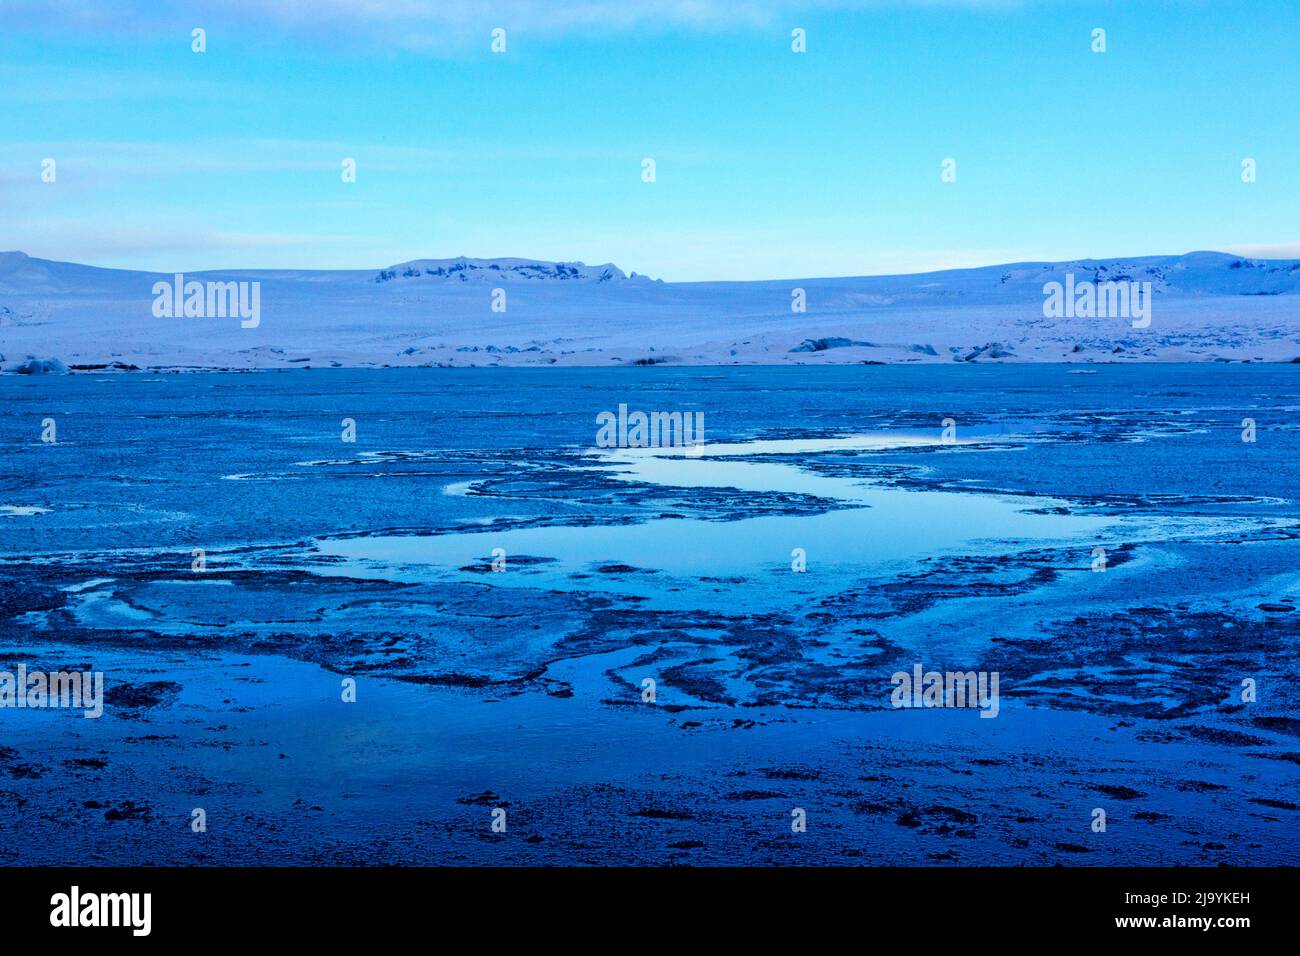 A winter 'blue hour' morning view across the Jökulsarlön iceberg lagoon with no icebergs present. The lagoon is covered by a broken layer of thin ice. Stock Photo